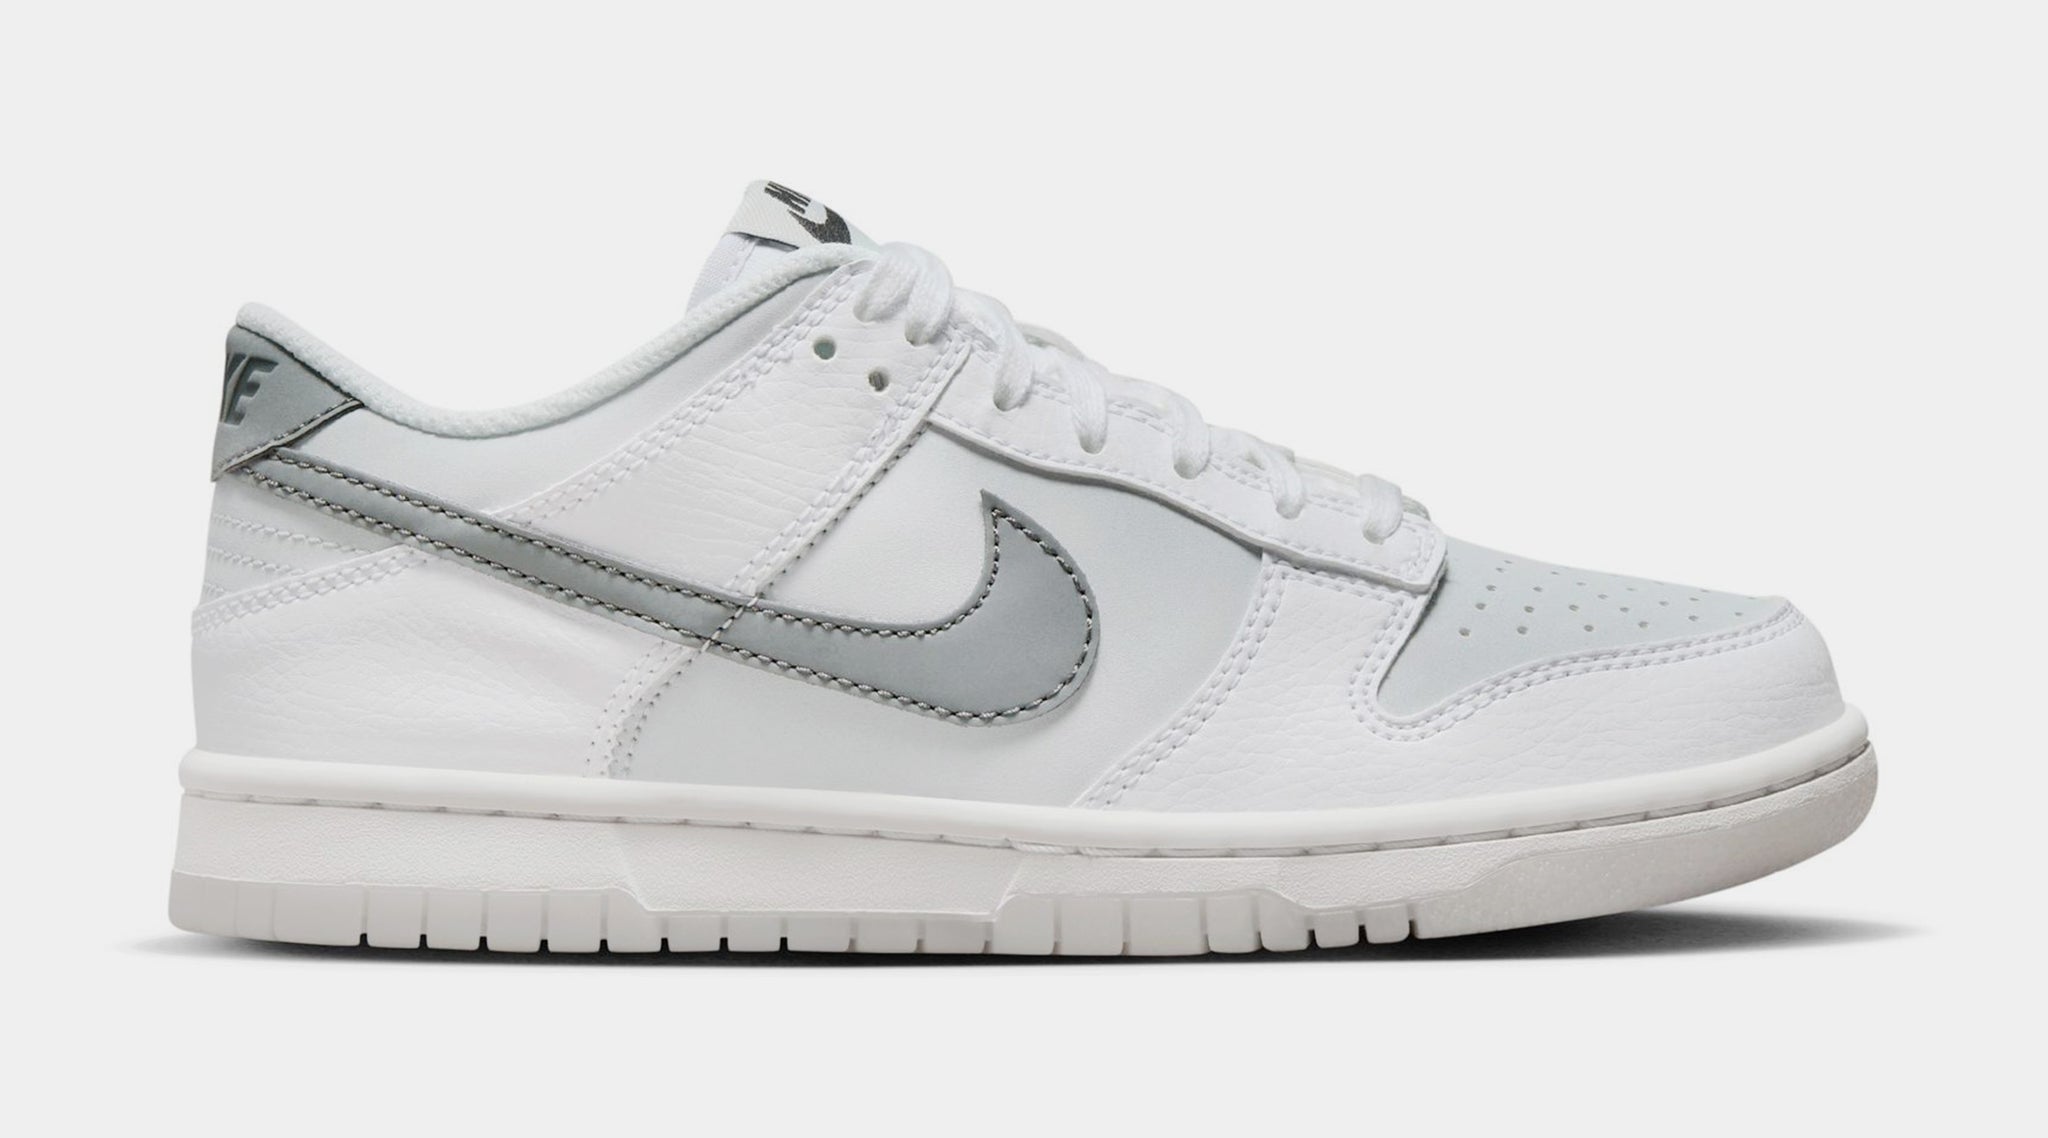 Nike Dunk Low Reflective Swoosh Grade School Lifestyle Shoes White ...